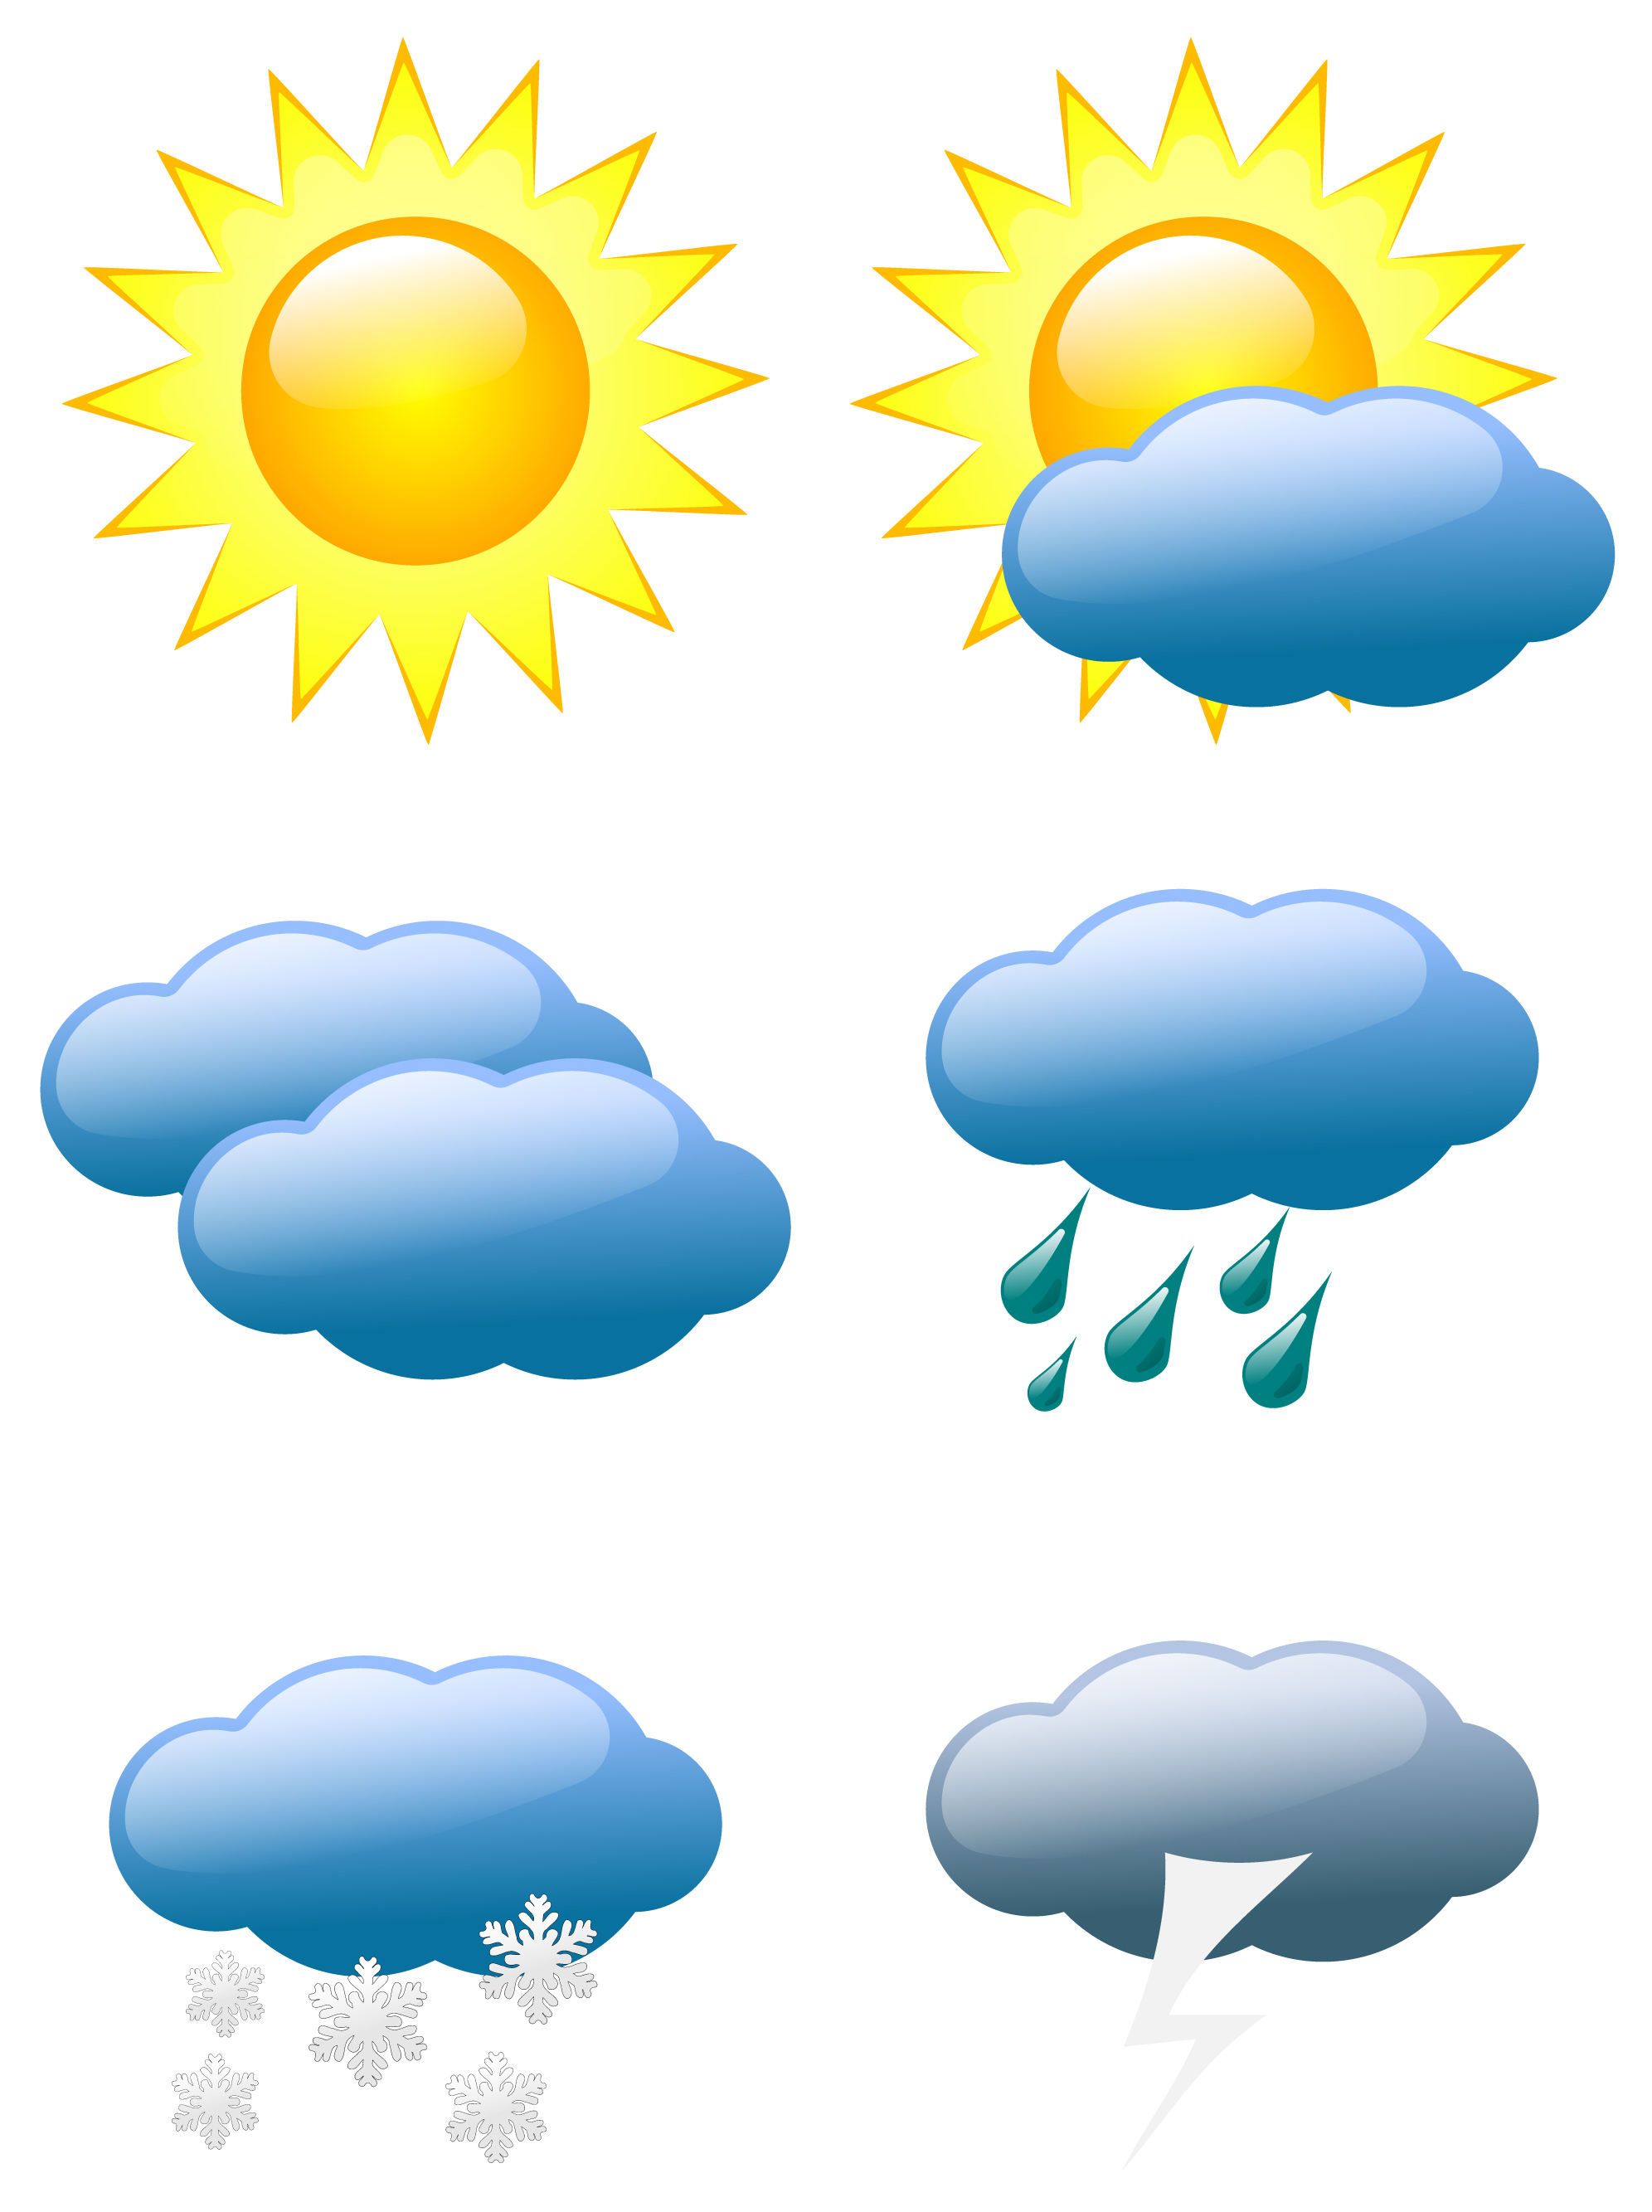 Free Weather Symbols Images, Download Free Clip Art, Free.